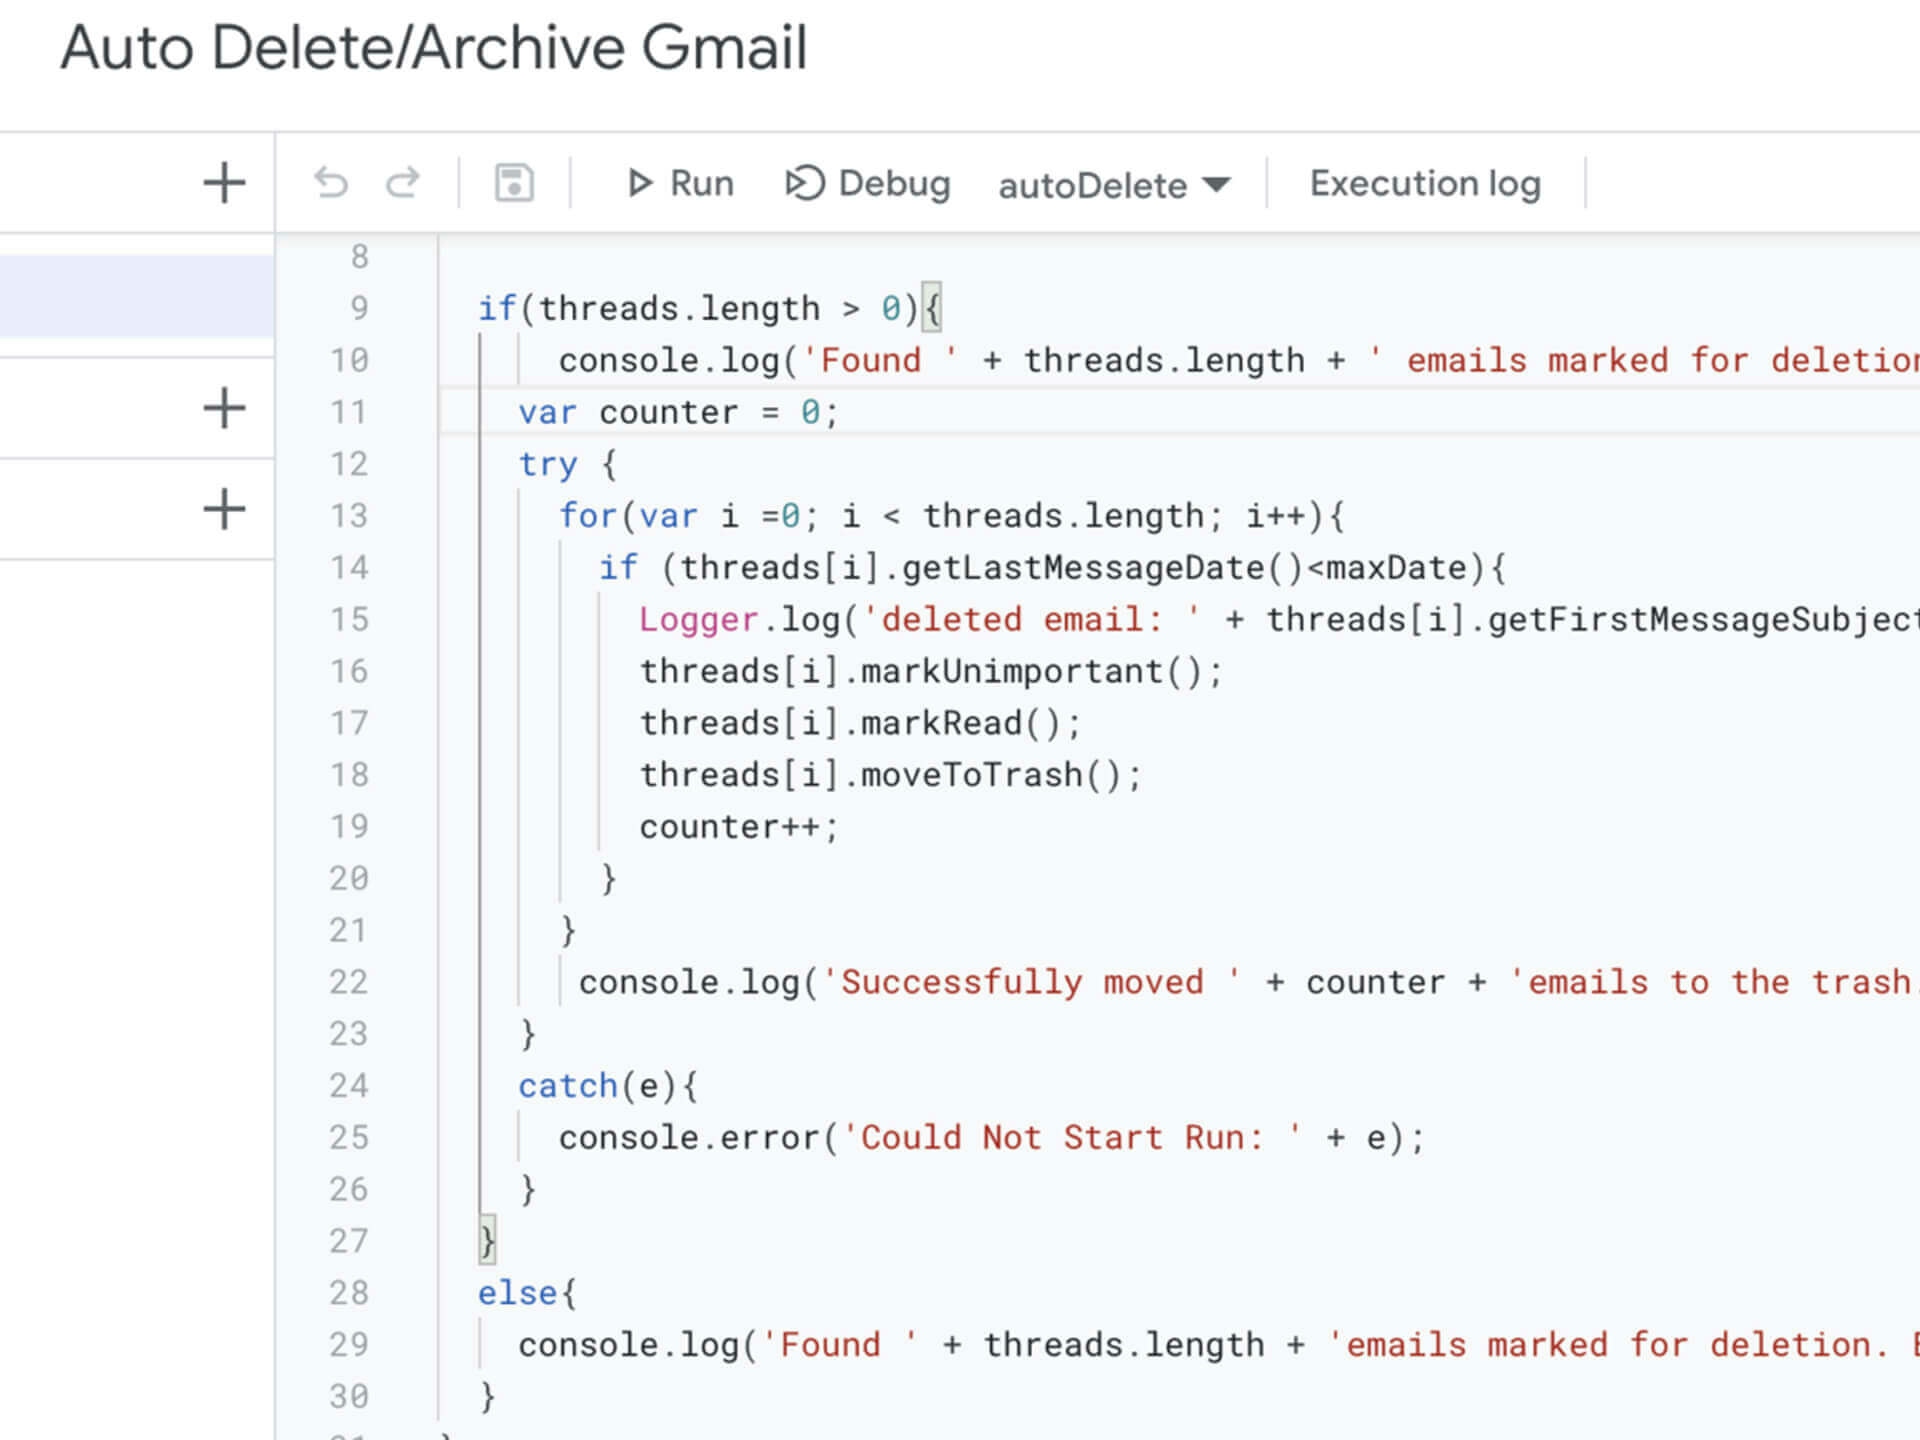 Gmail: Auto Delete/Archive Emails After a Set Number of Days, by Jordan Lambrecht